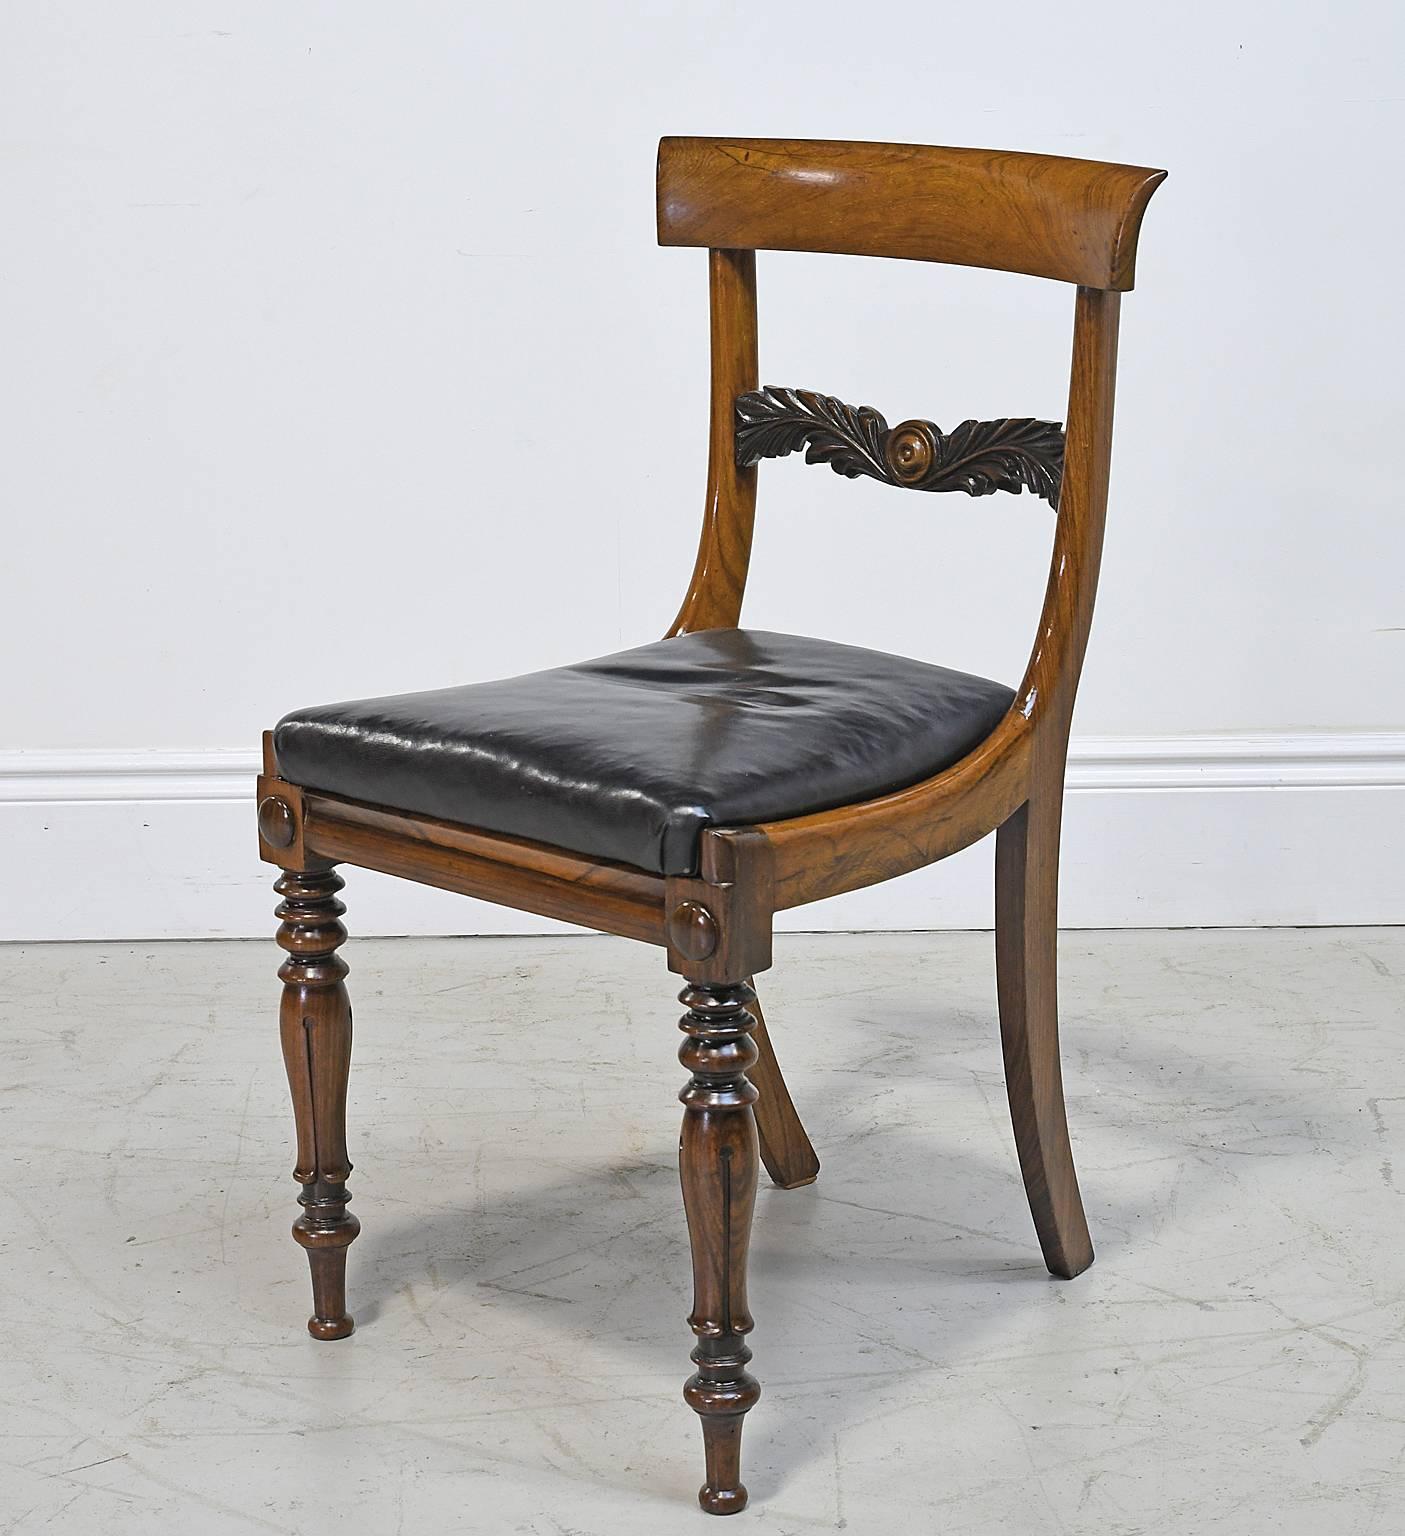 A handsome William IV Regency side chair in rosewood with concave back rail, well-articulated carved mid rail, turned front legs, splayed back legs and black leather slip seat, England, circa 1830. Chair offers a solid construction, as well as